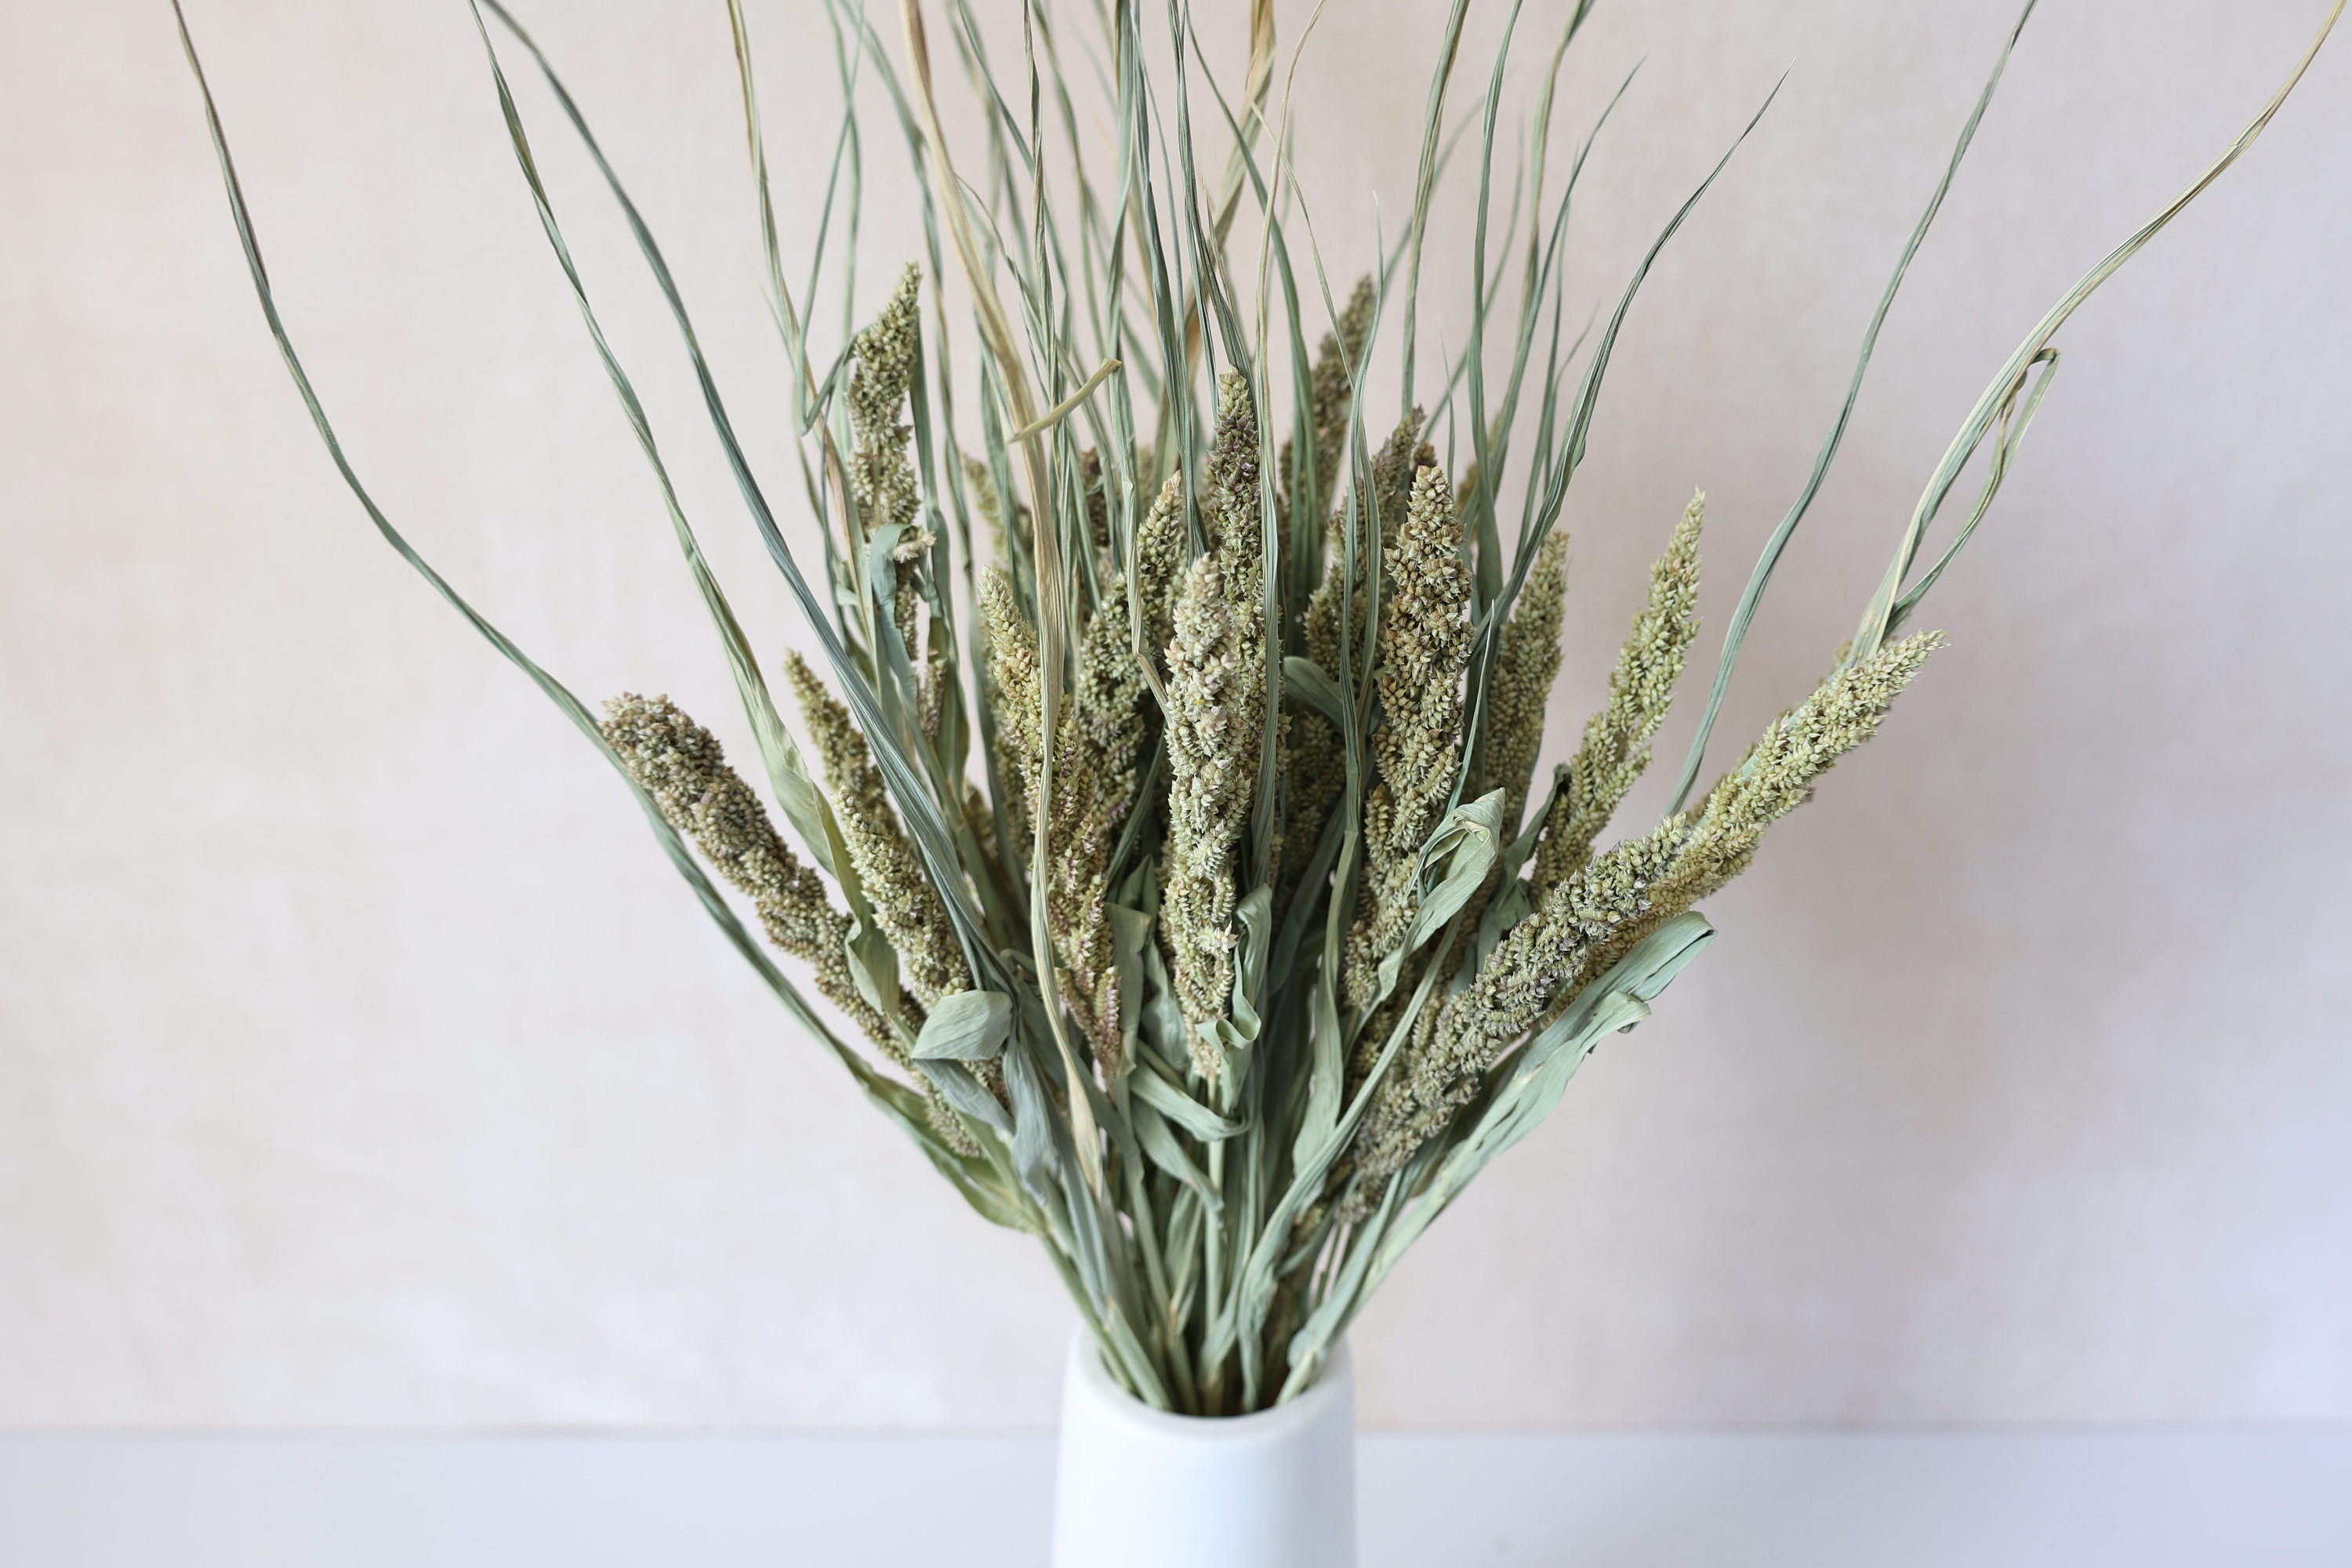 Dried Setaria Grass Wine Color, Dried Flowers, Dyed Grass, Dried Plants,  Natural Grass 